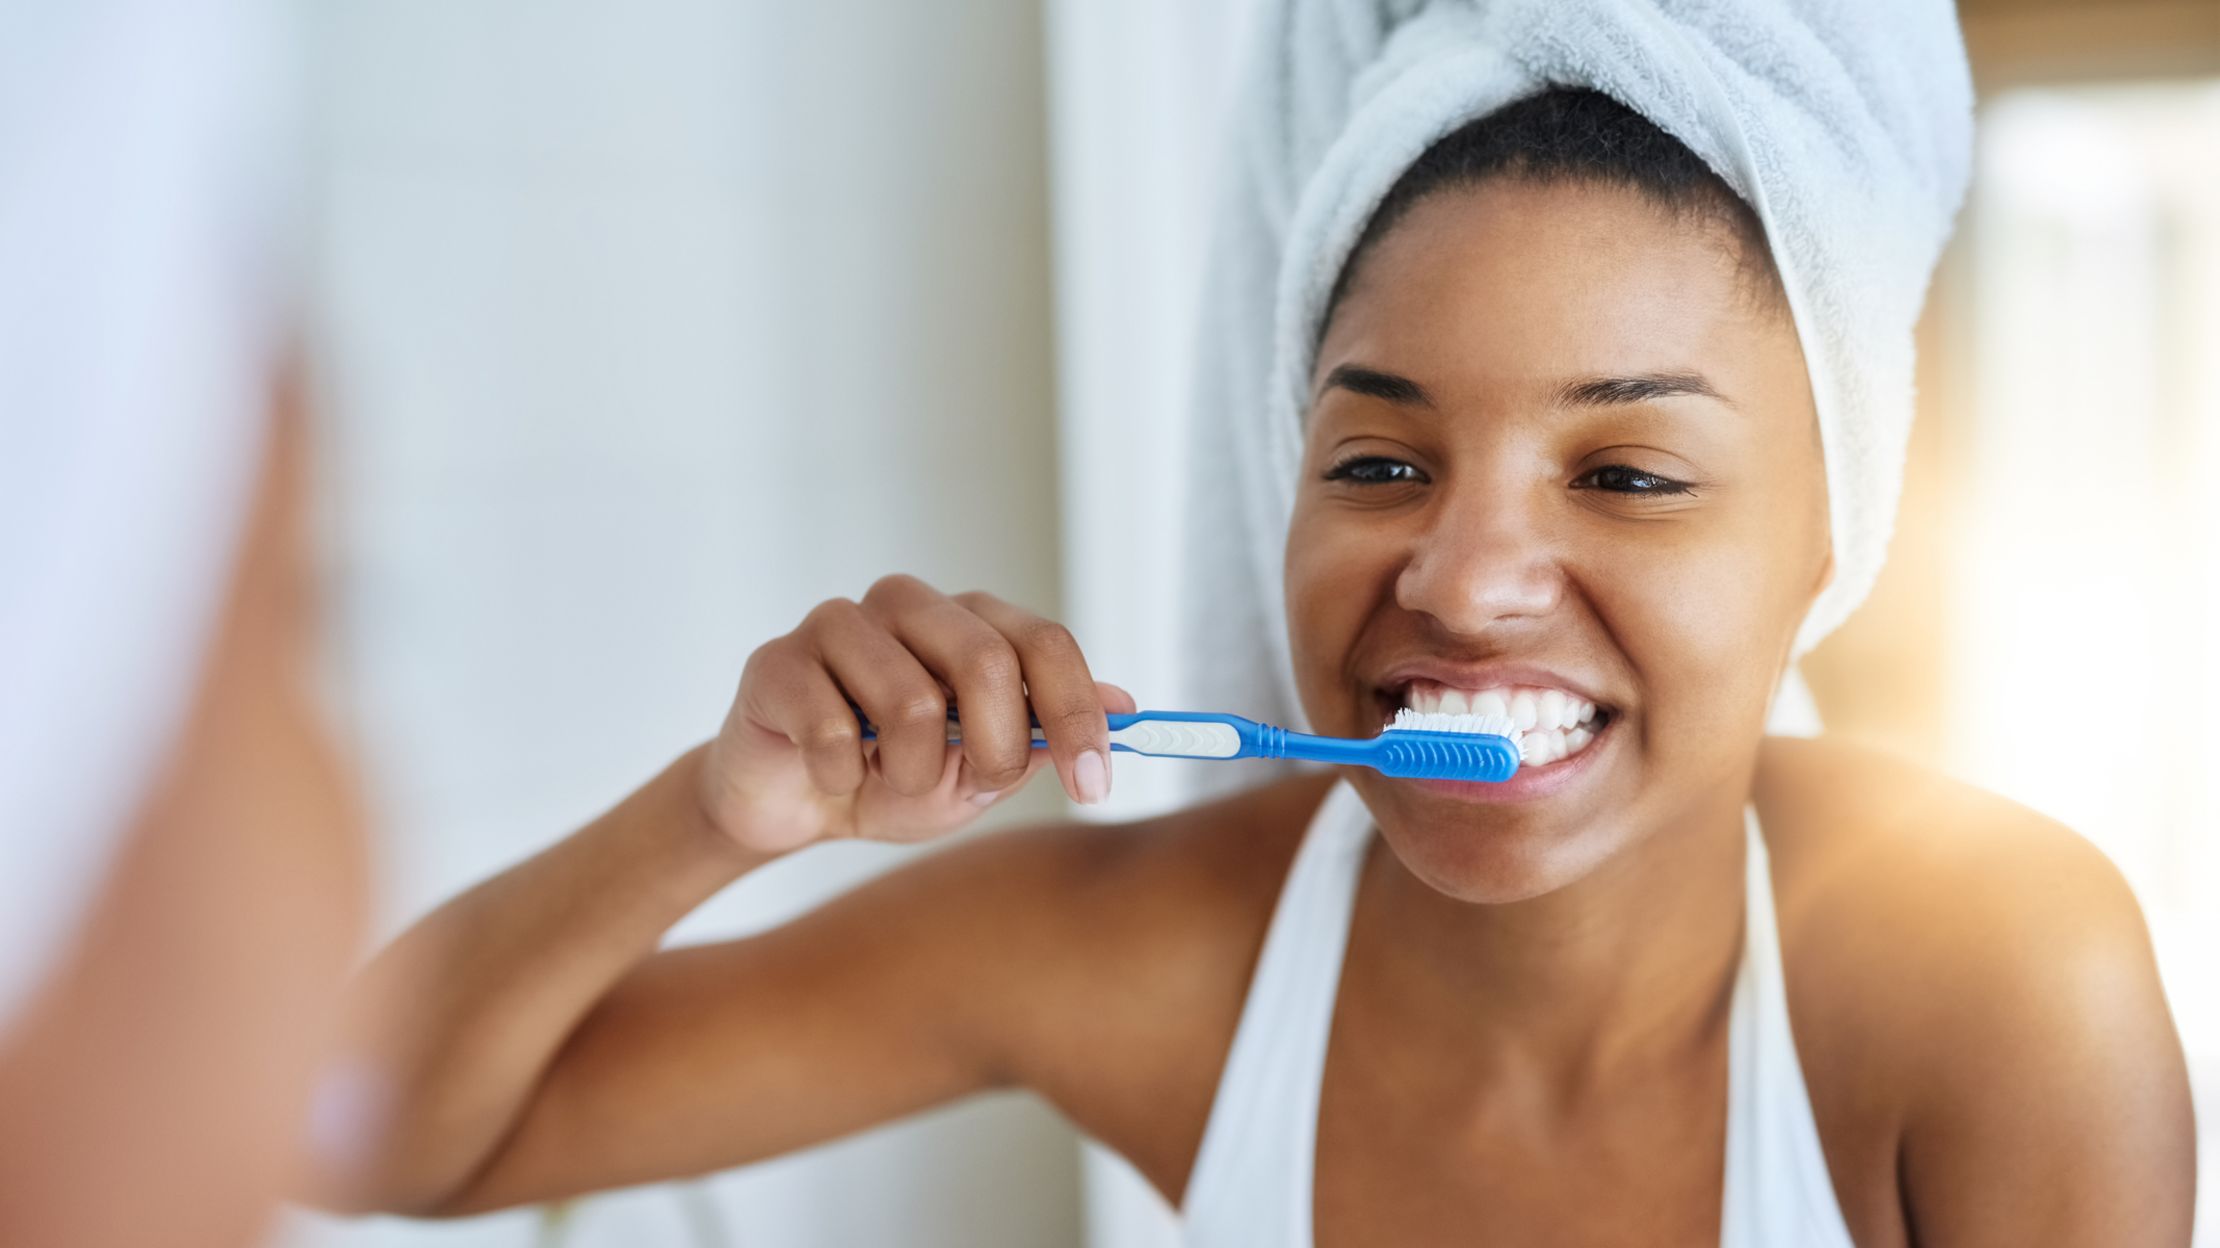 Brush your teeth to keep your heart healthy